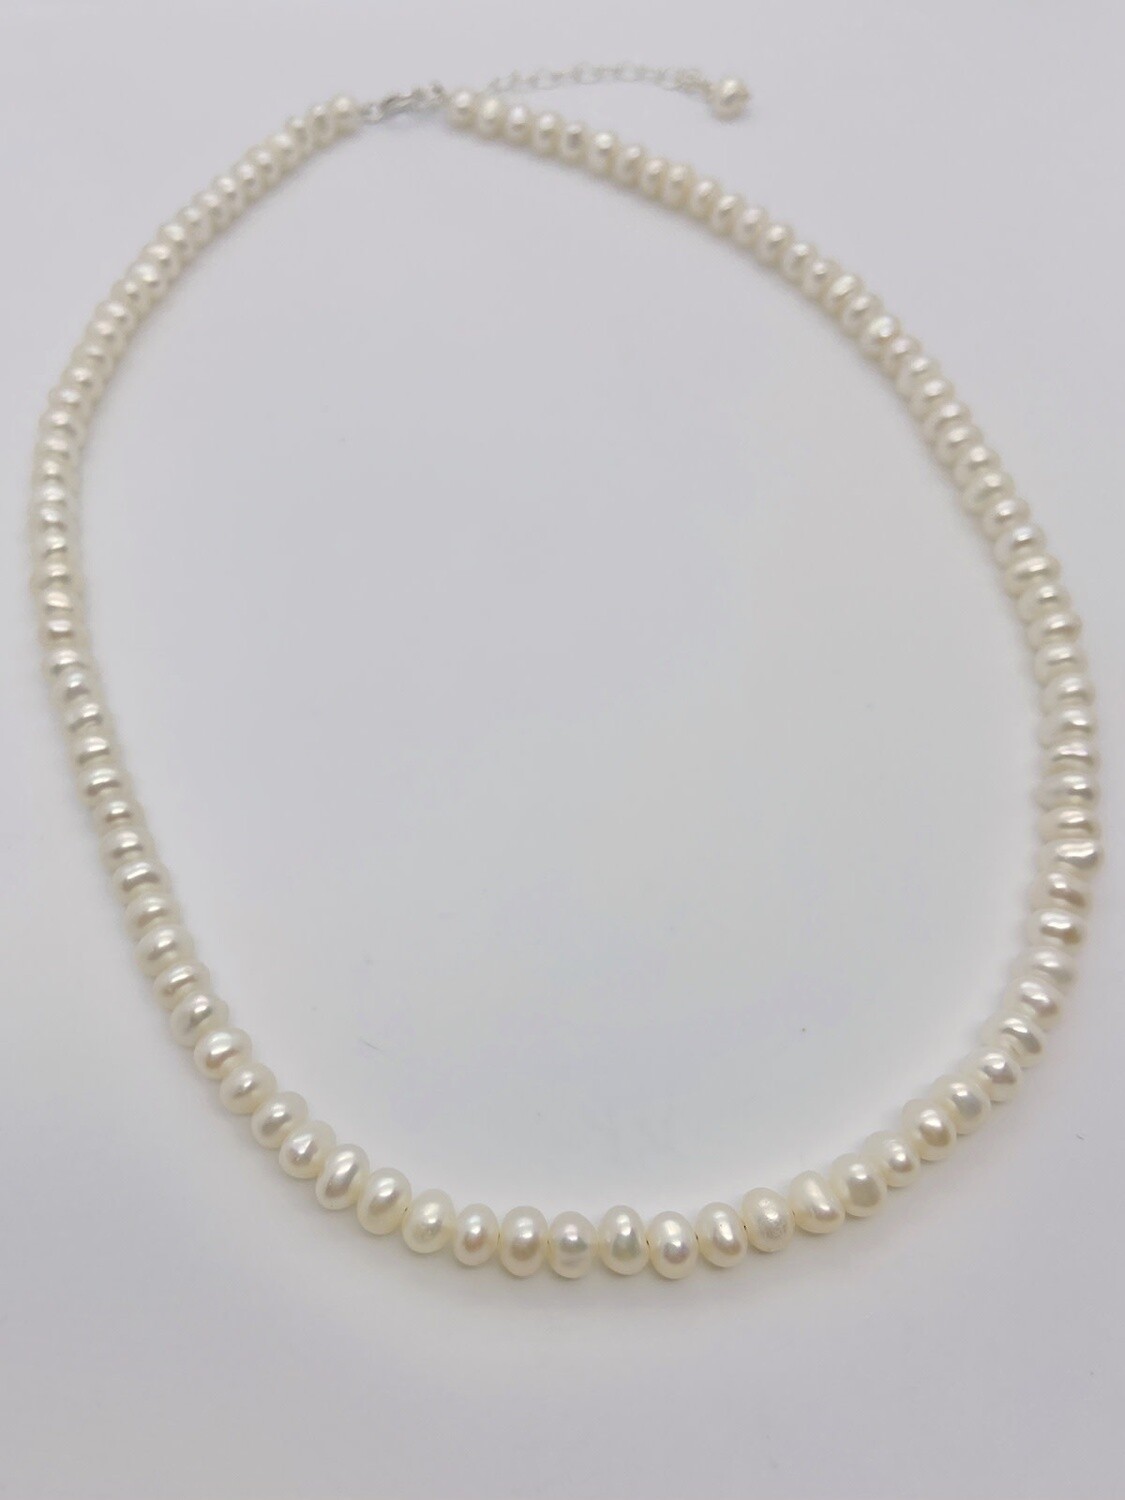 15" White Cultured Freshwater Pearl Necklace - DNO